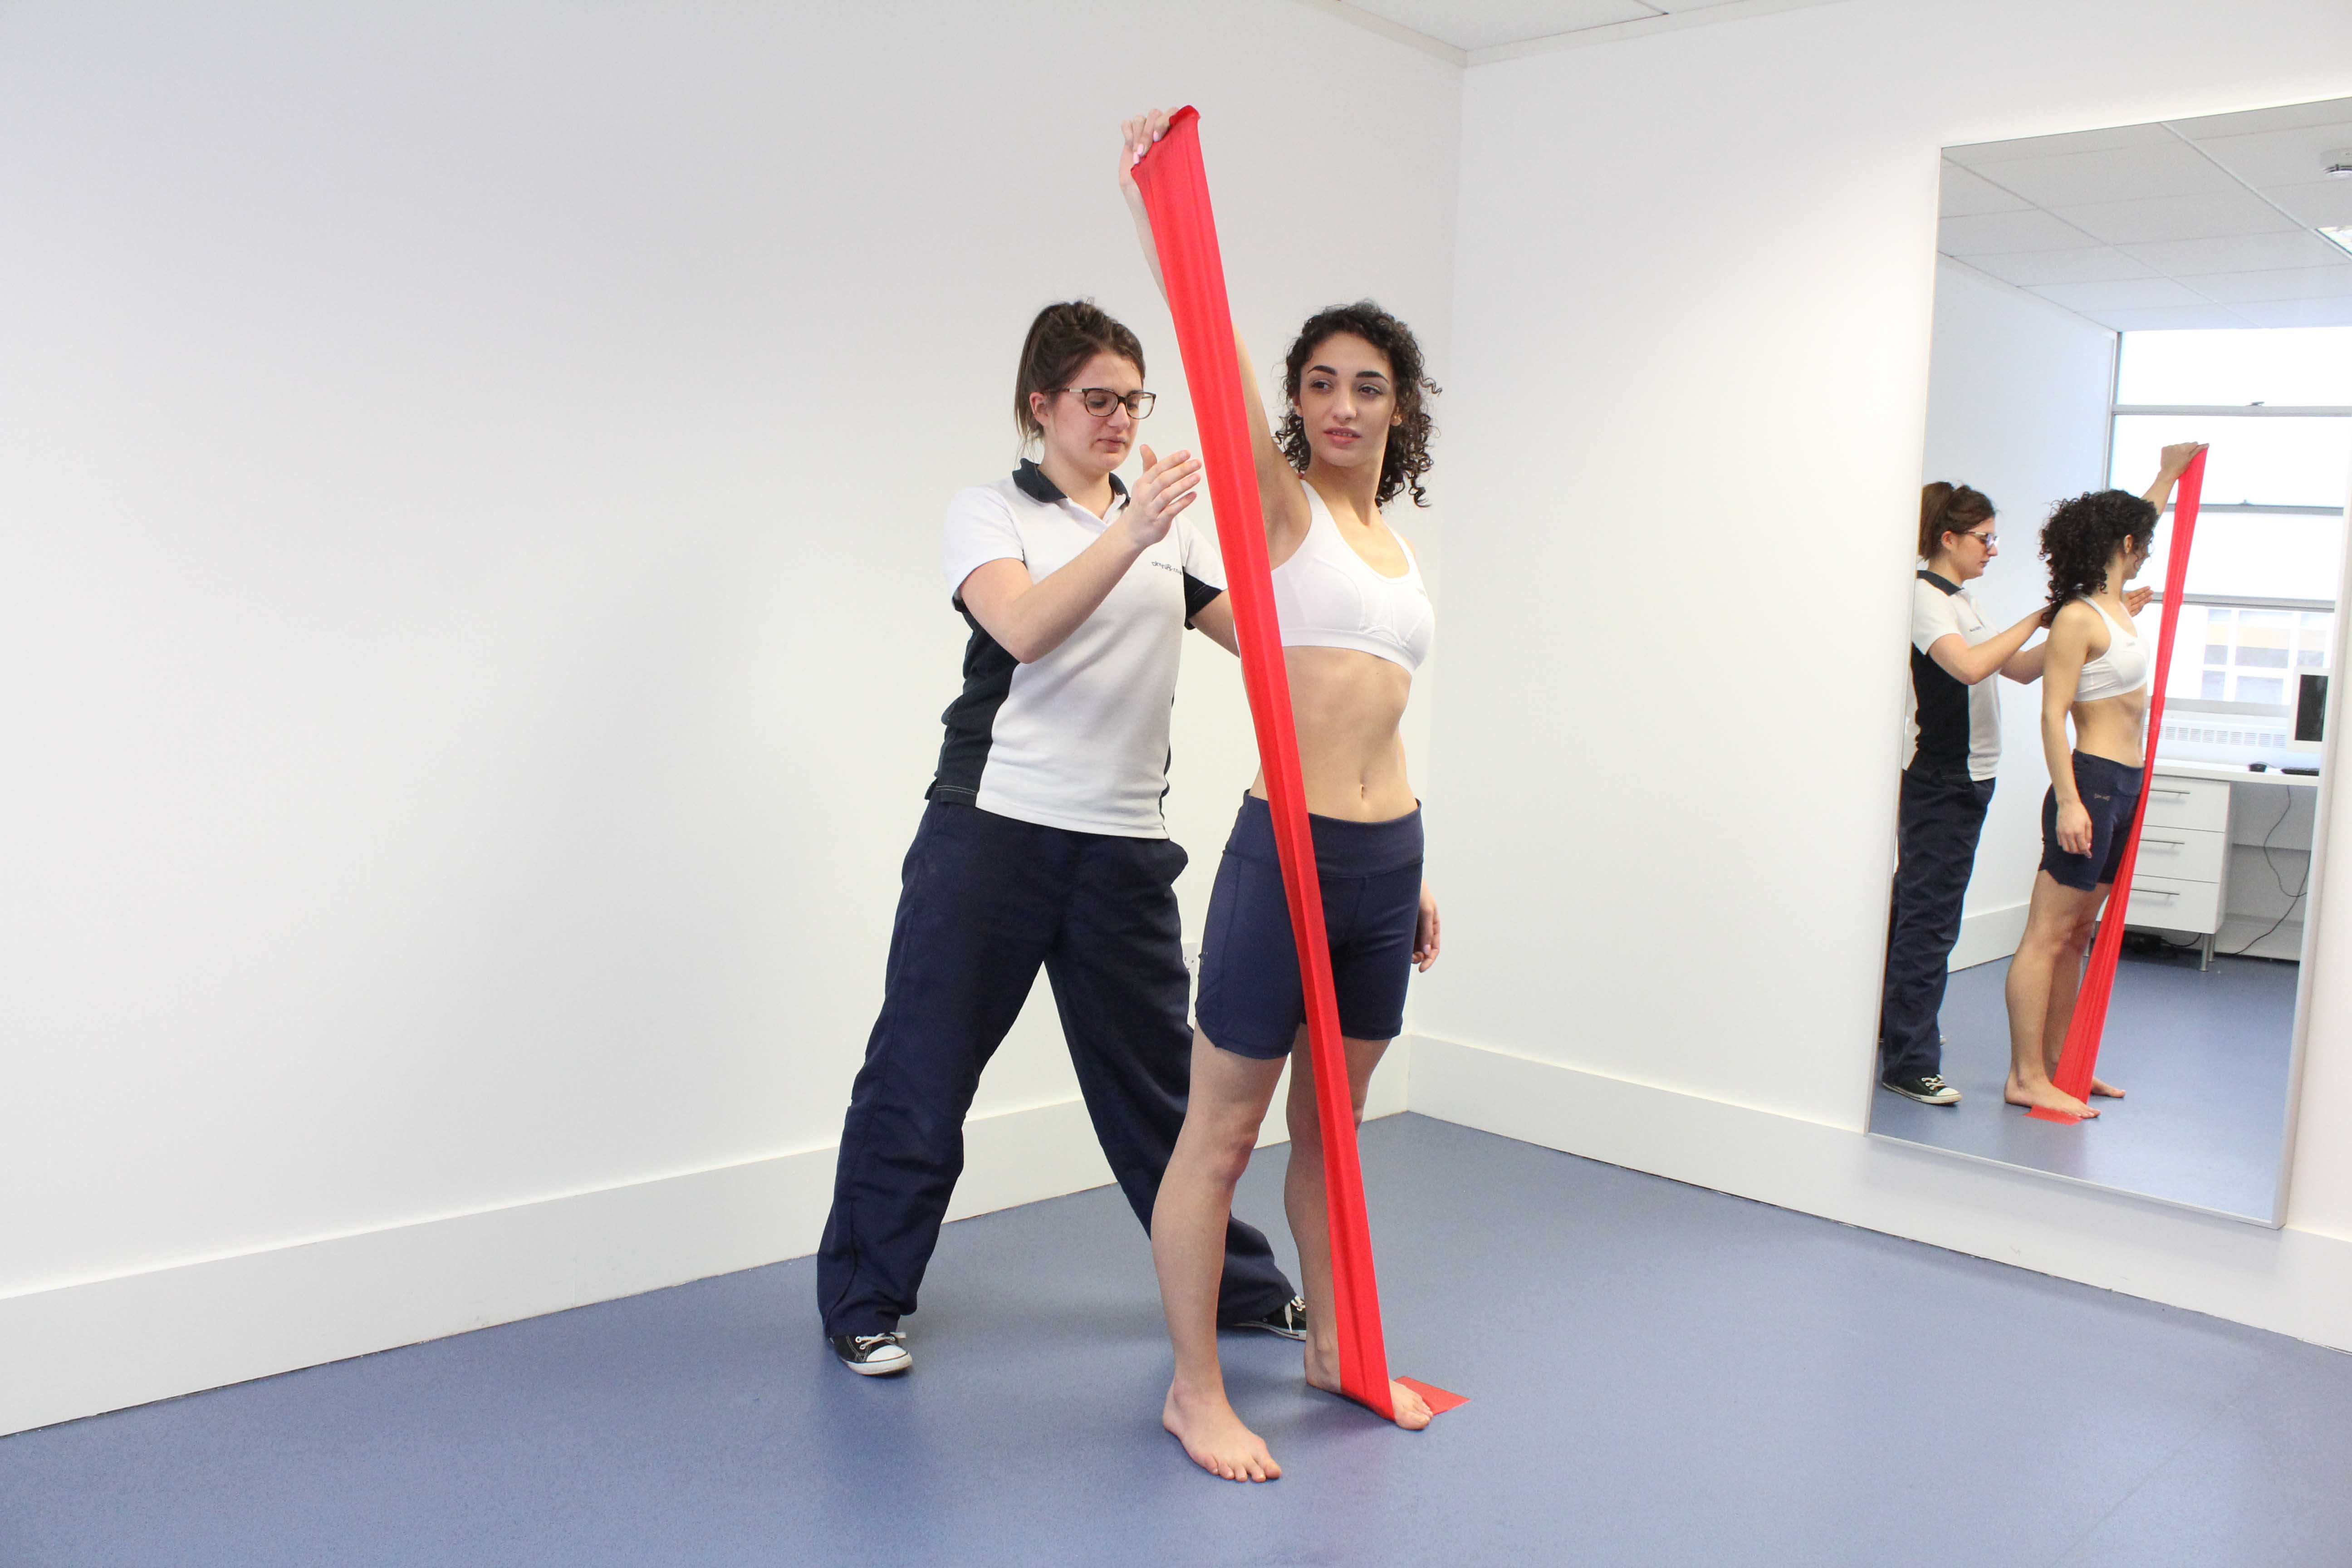 Toning and strengthening the shoulder muscles using a resistance band under supervision of a Physiotherapist